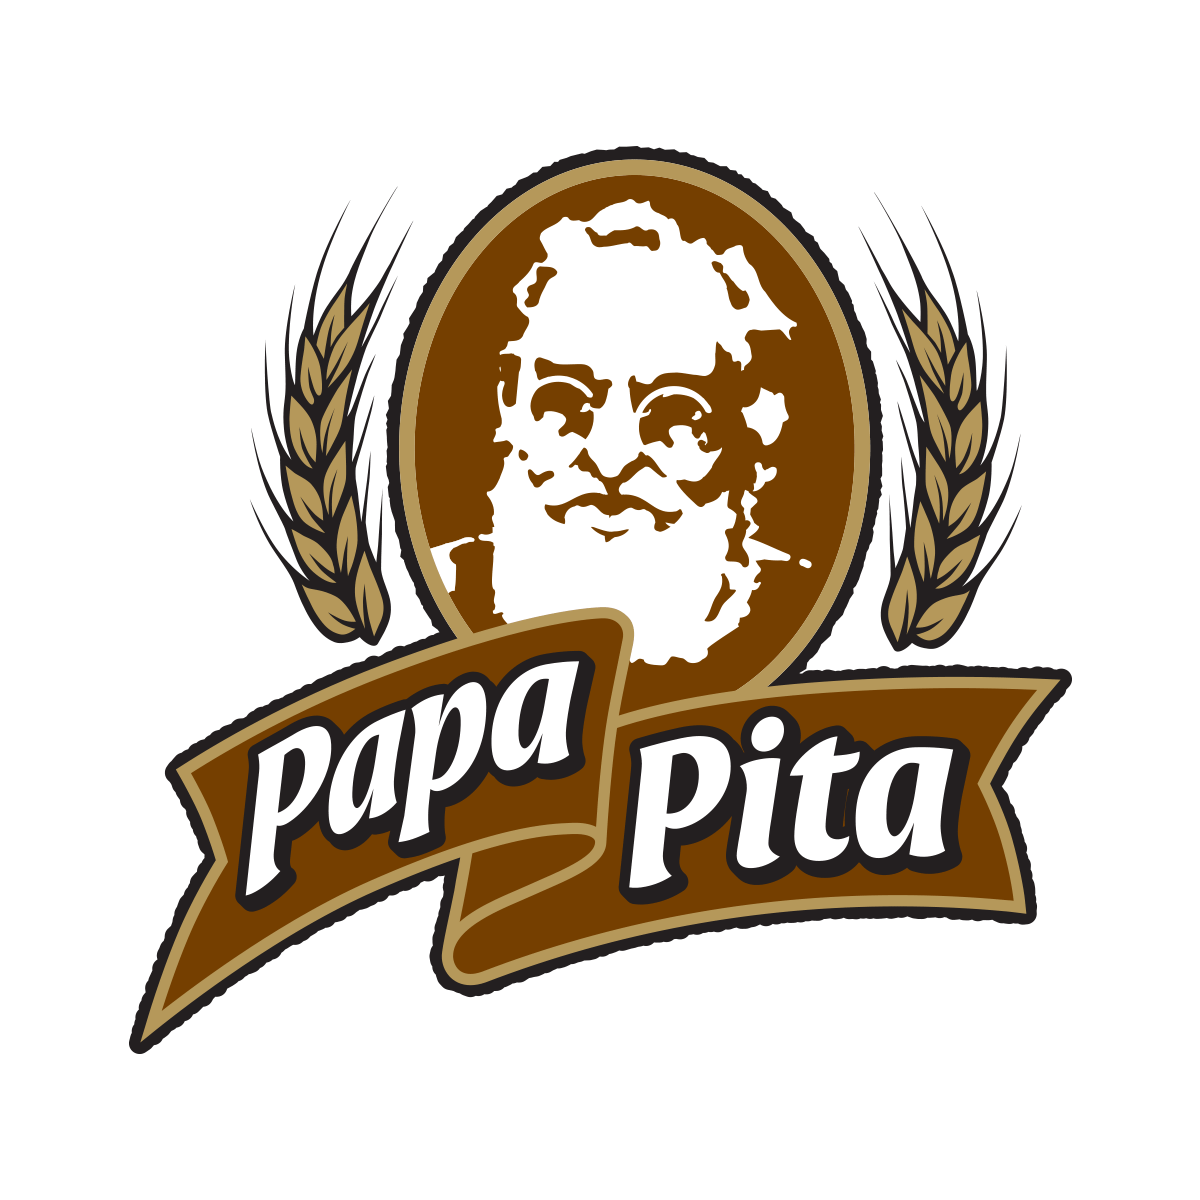 Pita Logo - Papa Pita, bagels, and breads perfected for over 30 years!